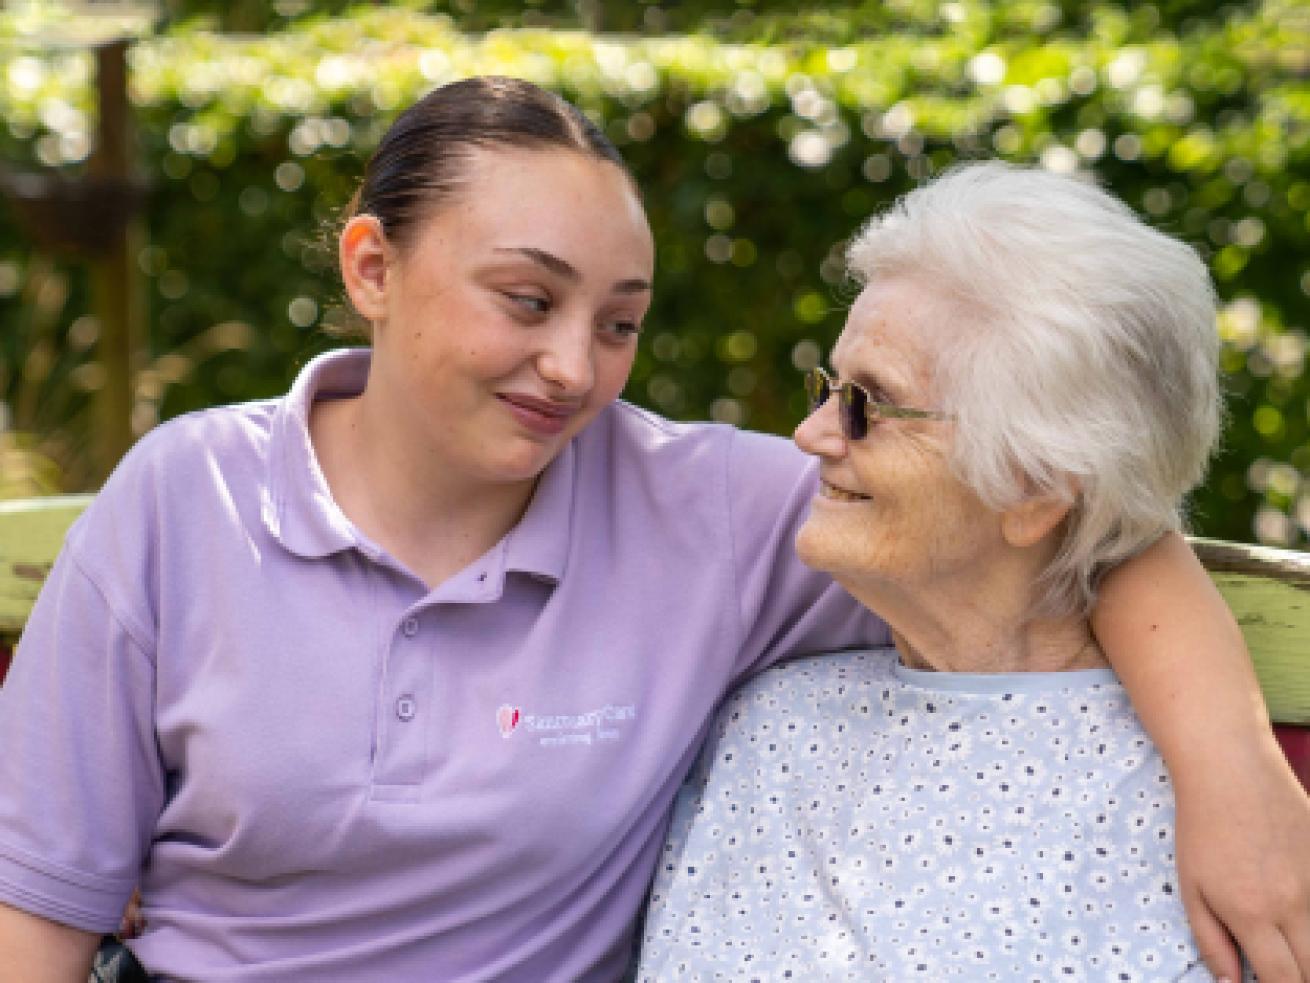 Sanctuary Care Assistant sitting on a garden bench with their arm around a resident